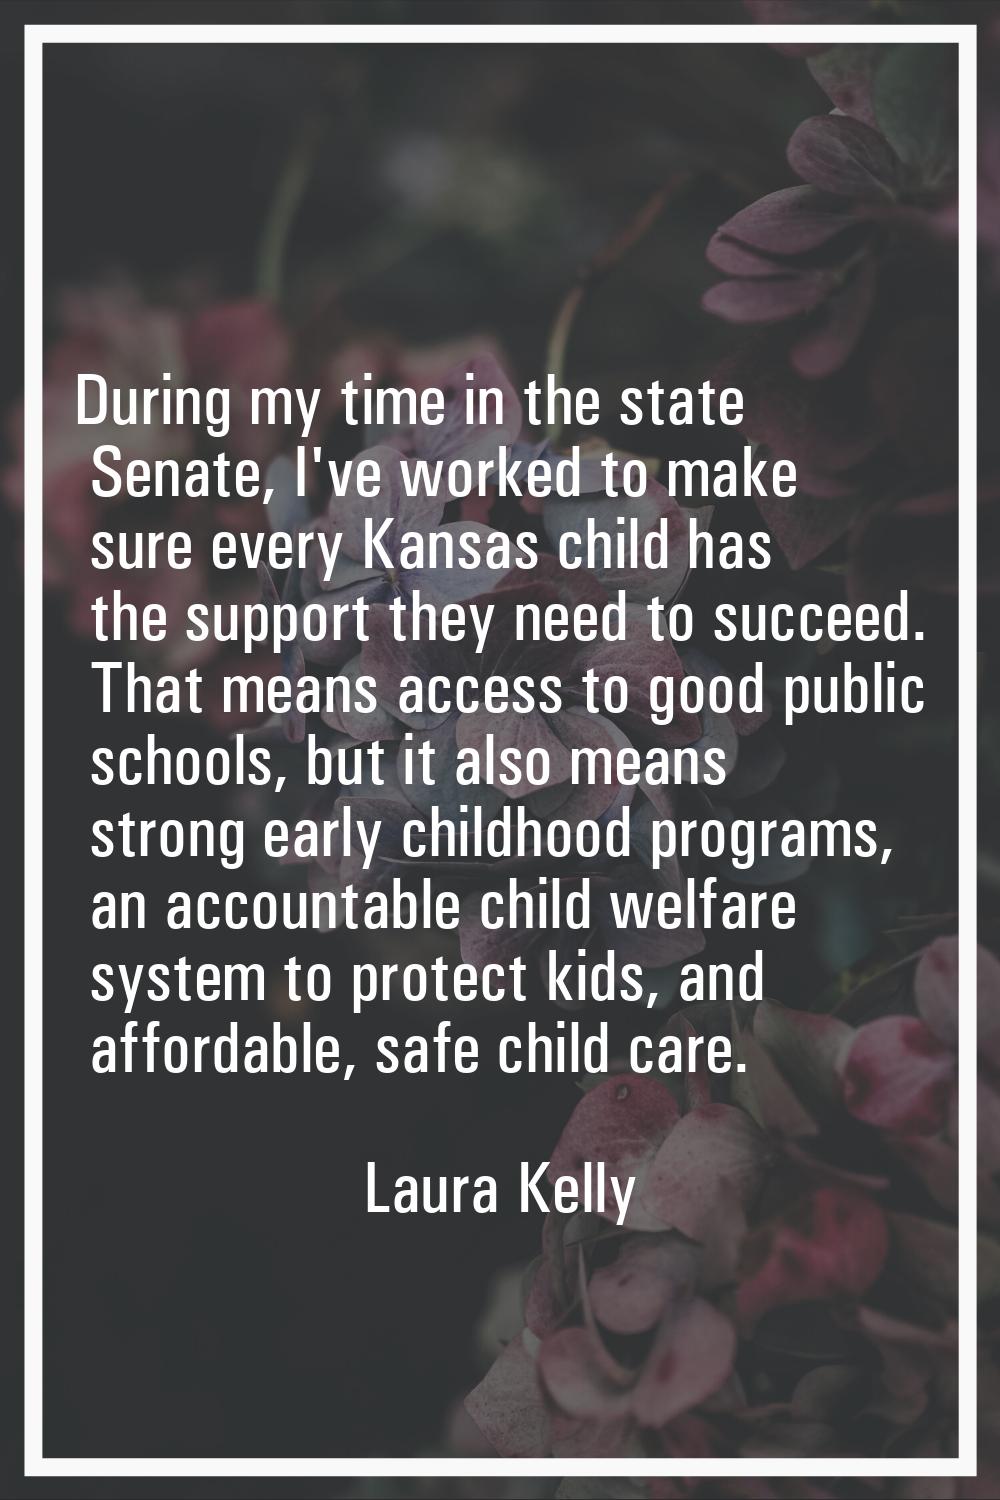 During my time in the state Senate, I've worked to make sure every Kansas child has the support the